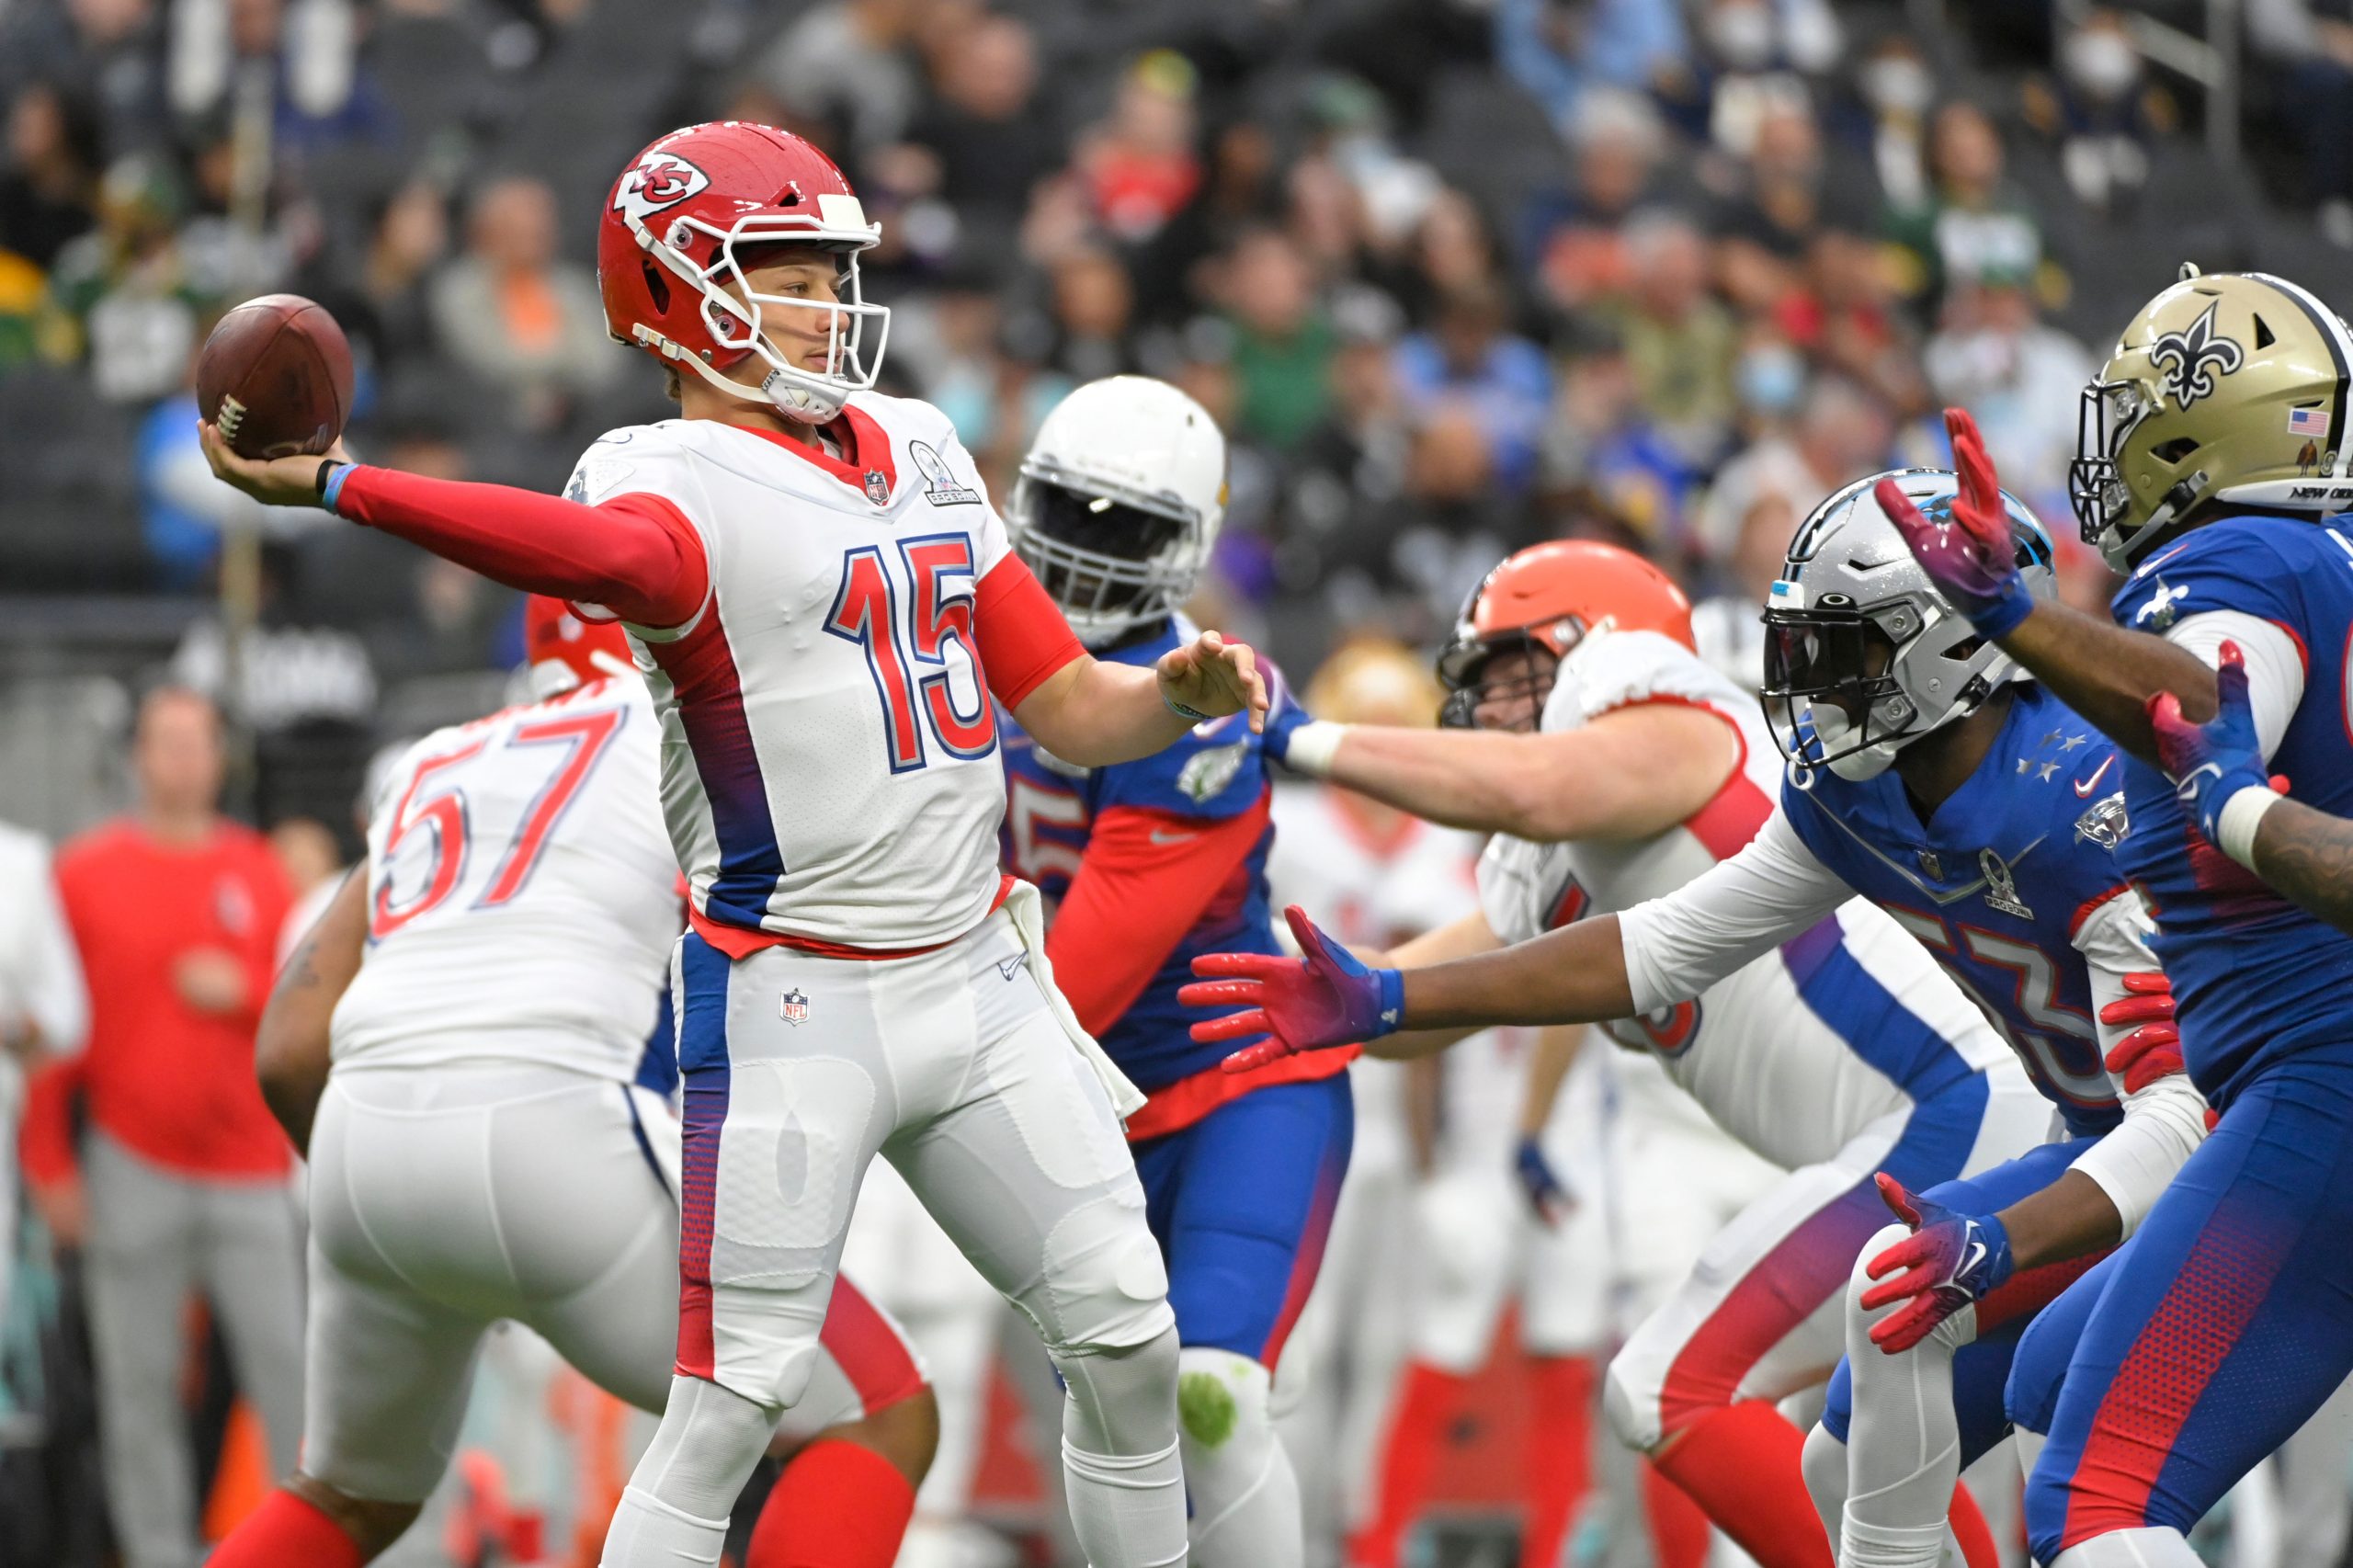 Patrick Mahomes race: What is quarterback’s ethnicity, nationality?